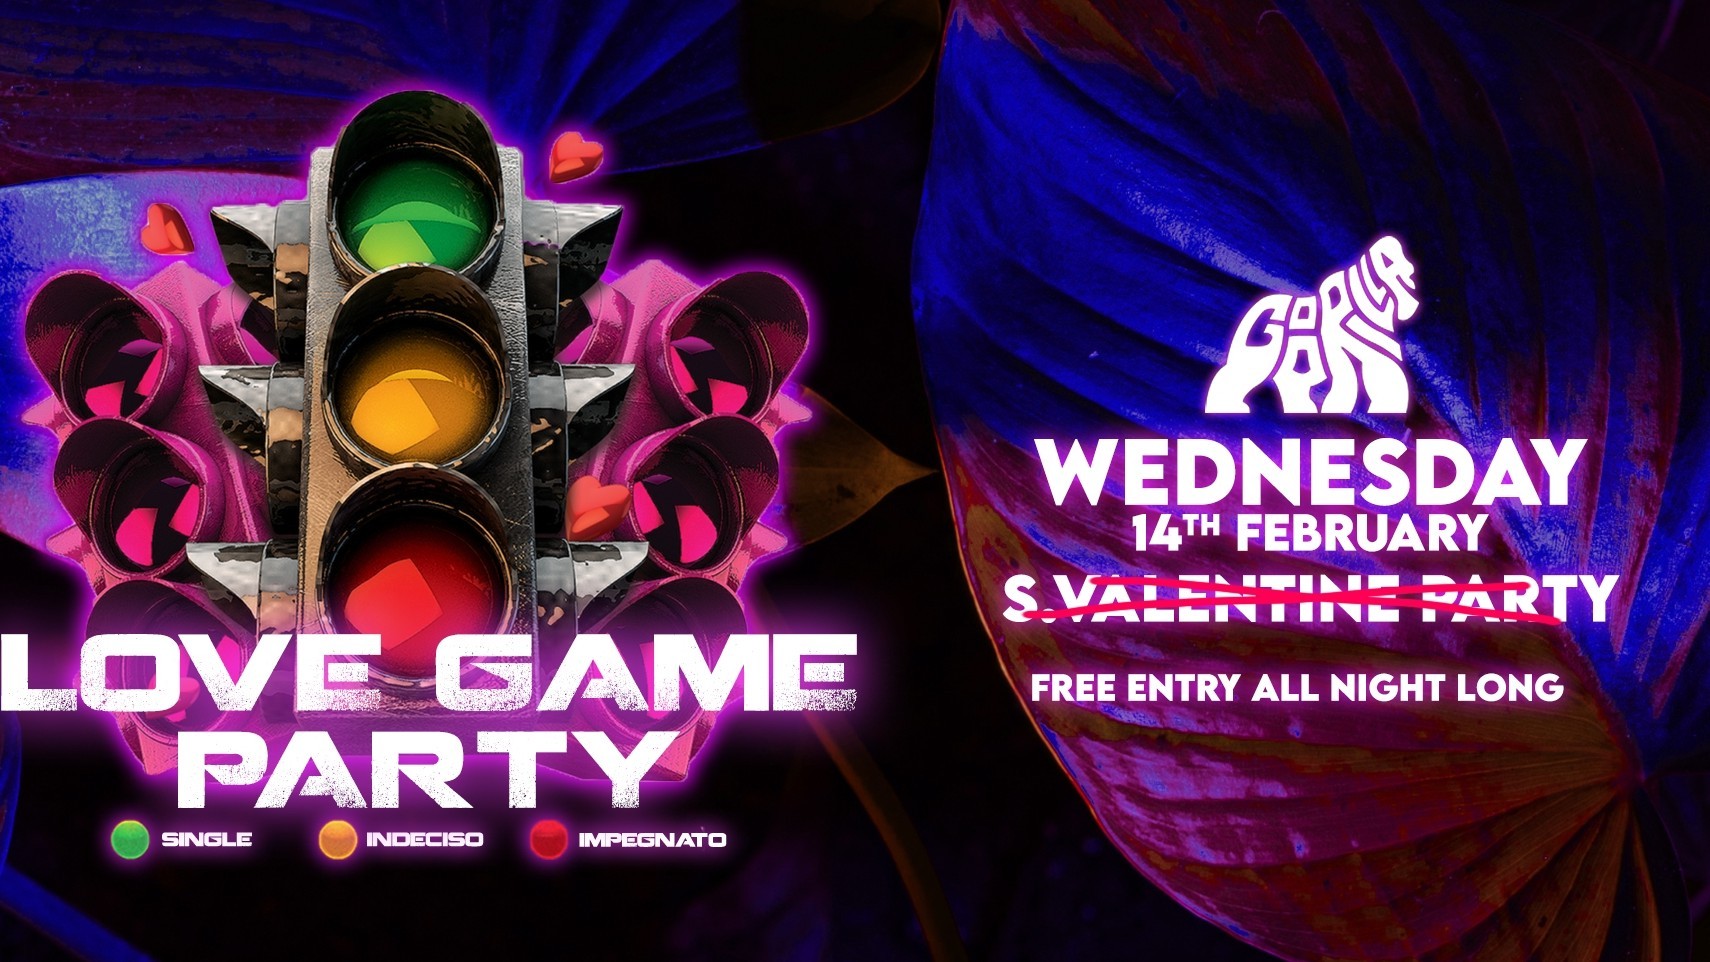 Mercoledrink x Love Game Party